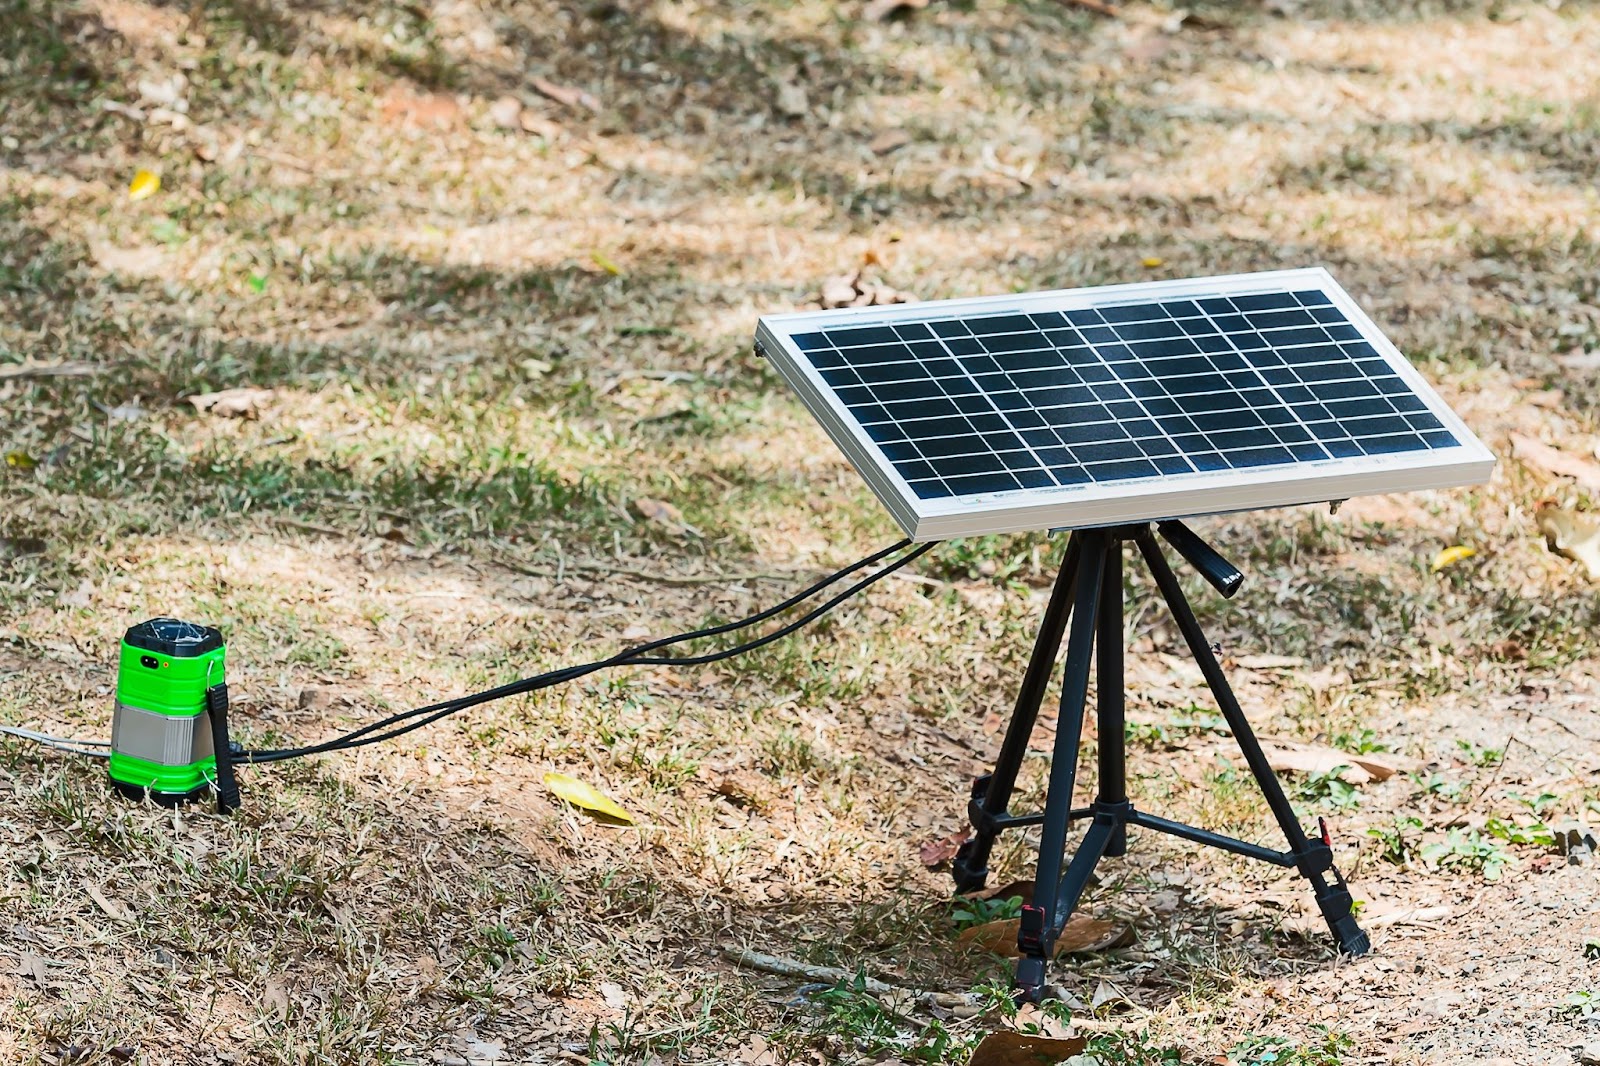 Outdoor small tripod with solar panel and connection cord